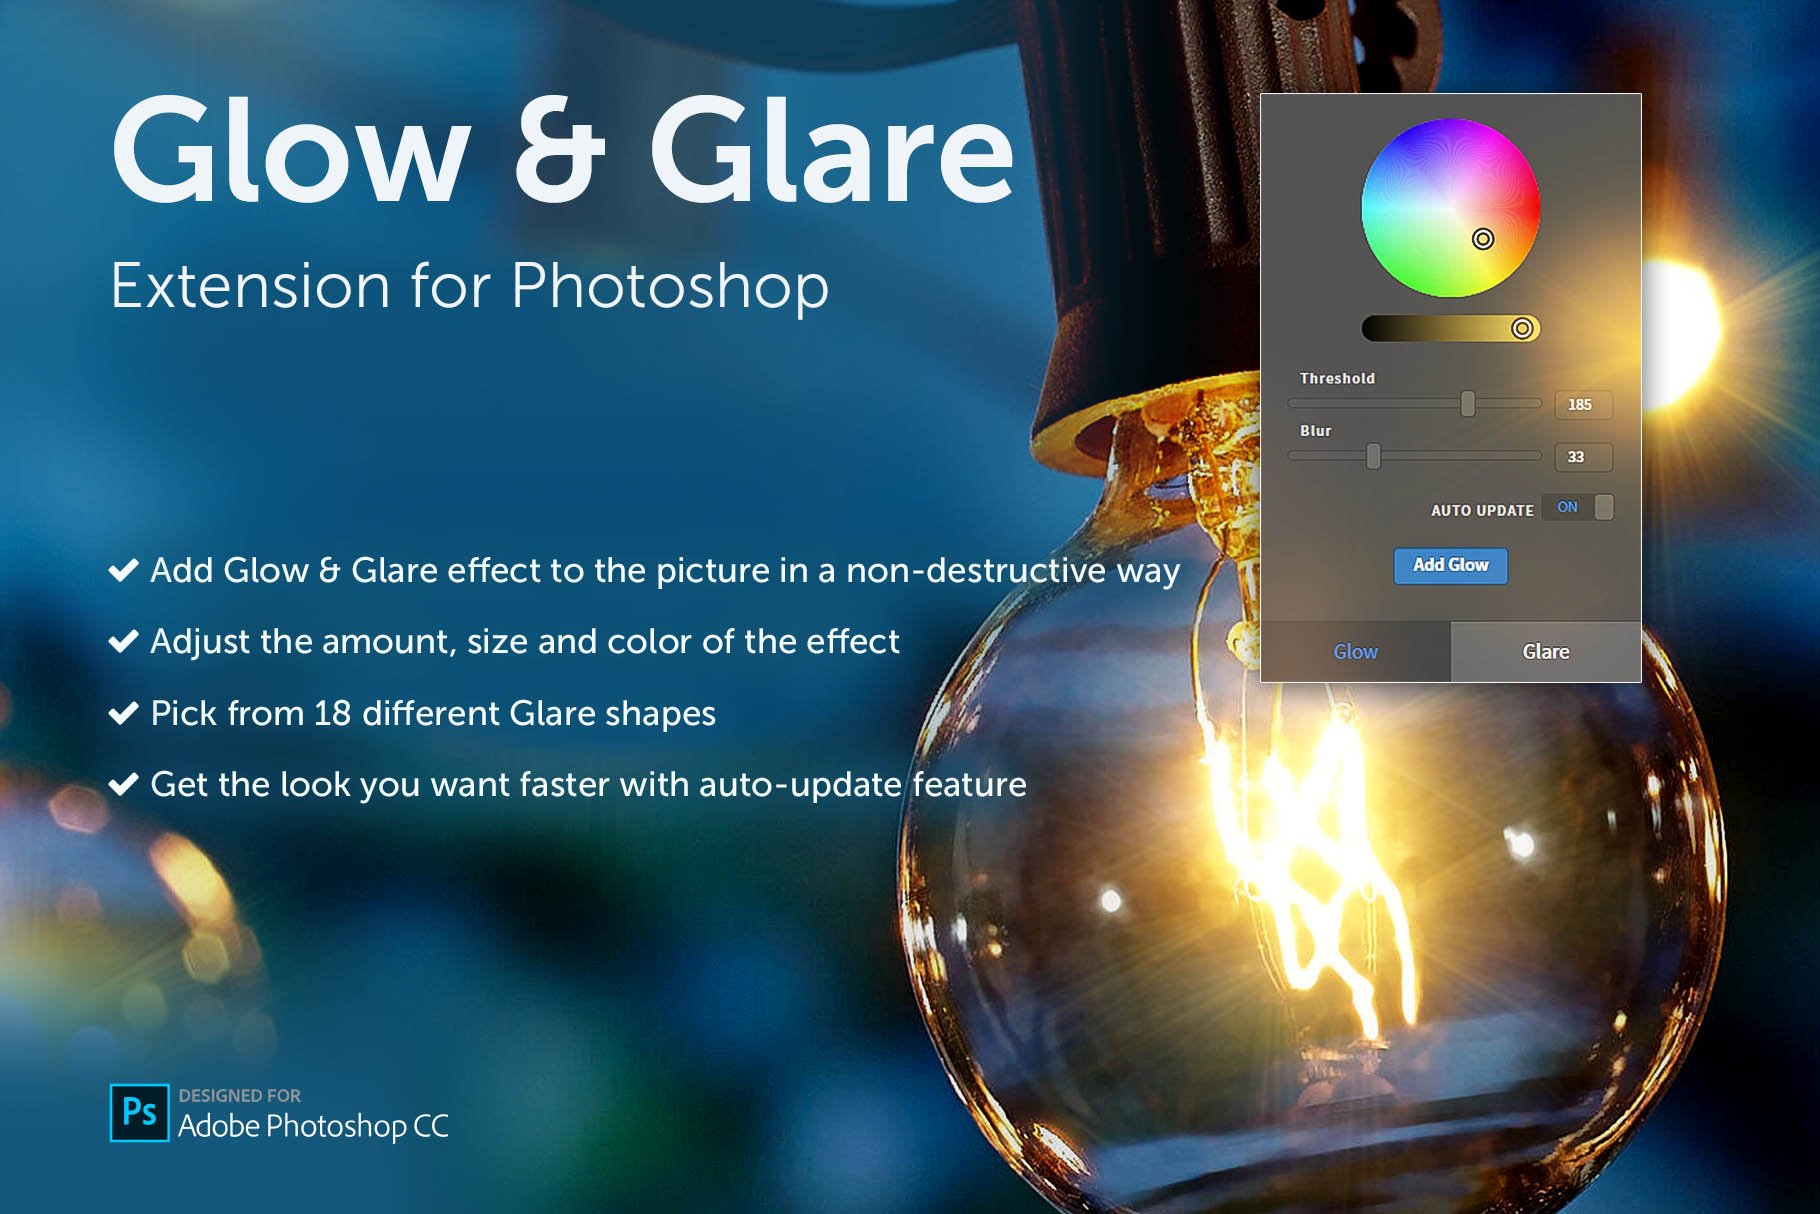 Glow & Glare - Photoshop Extensioncover image.